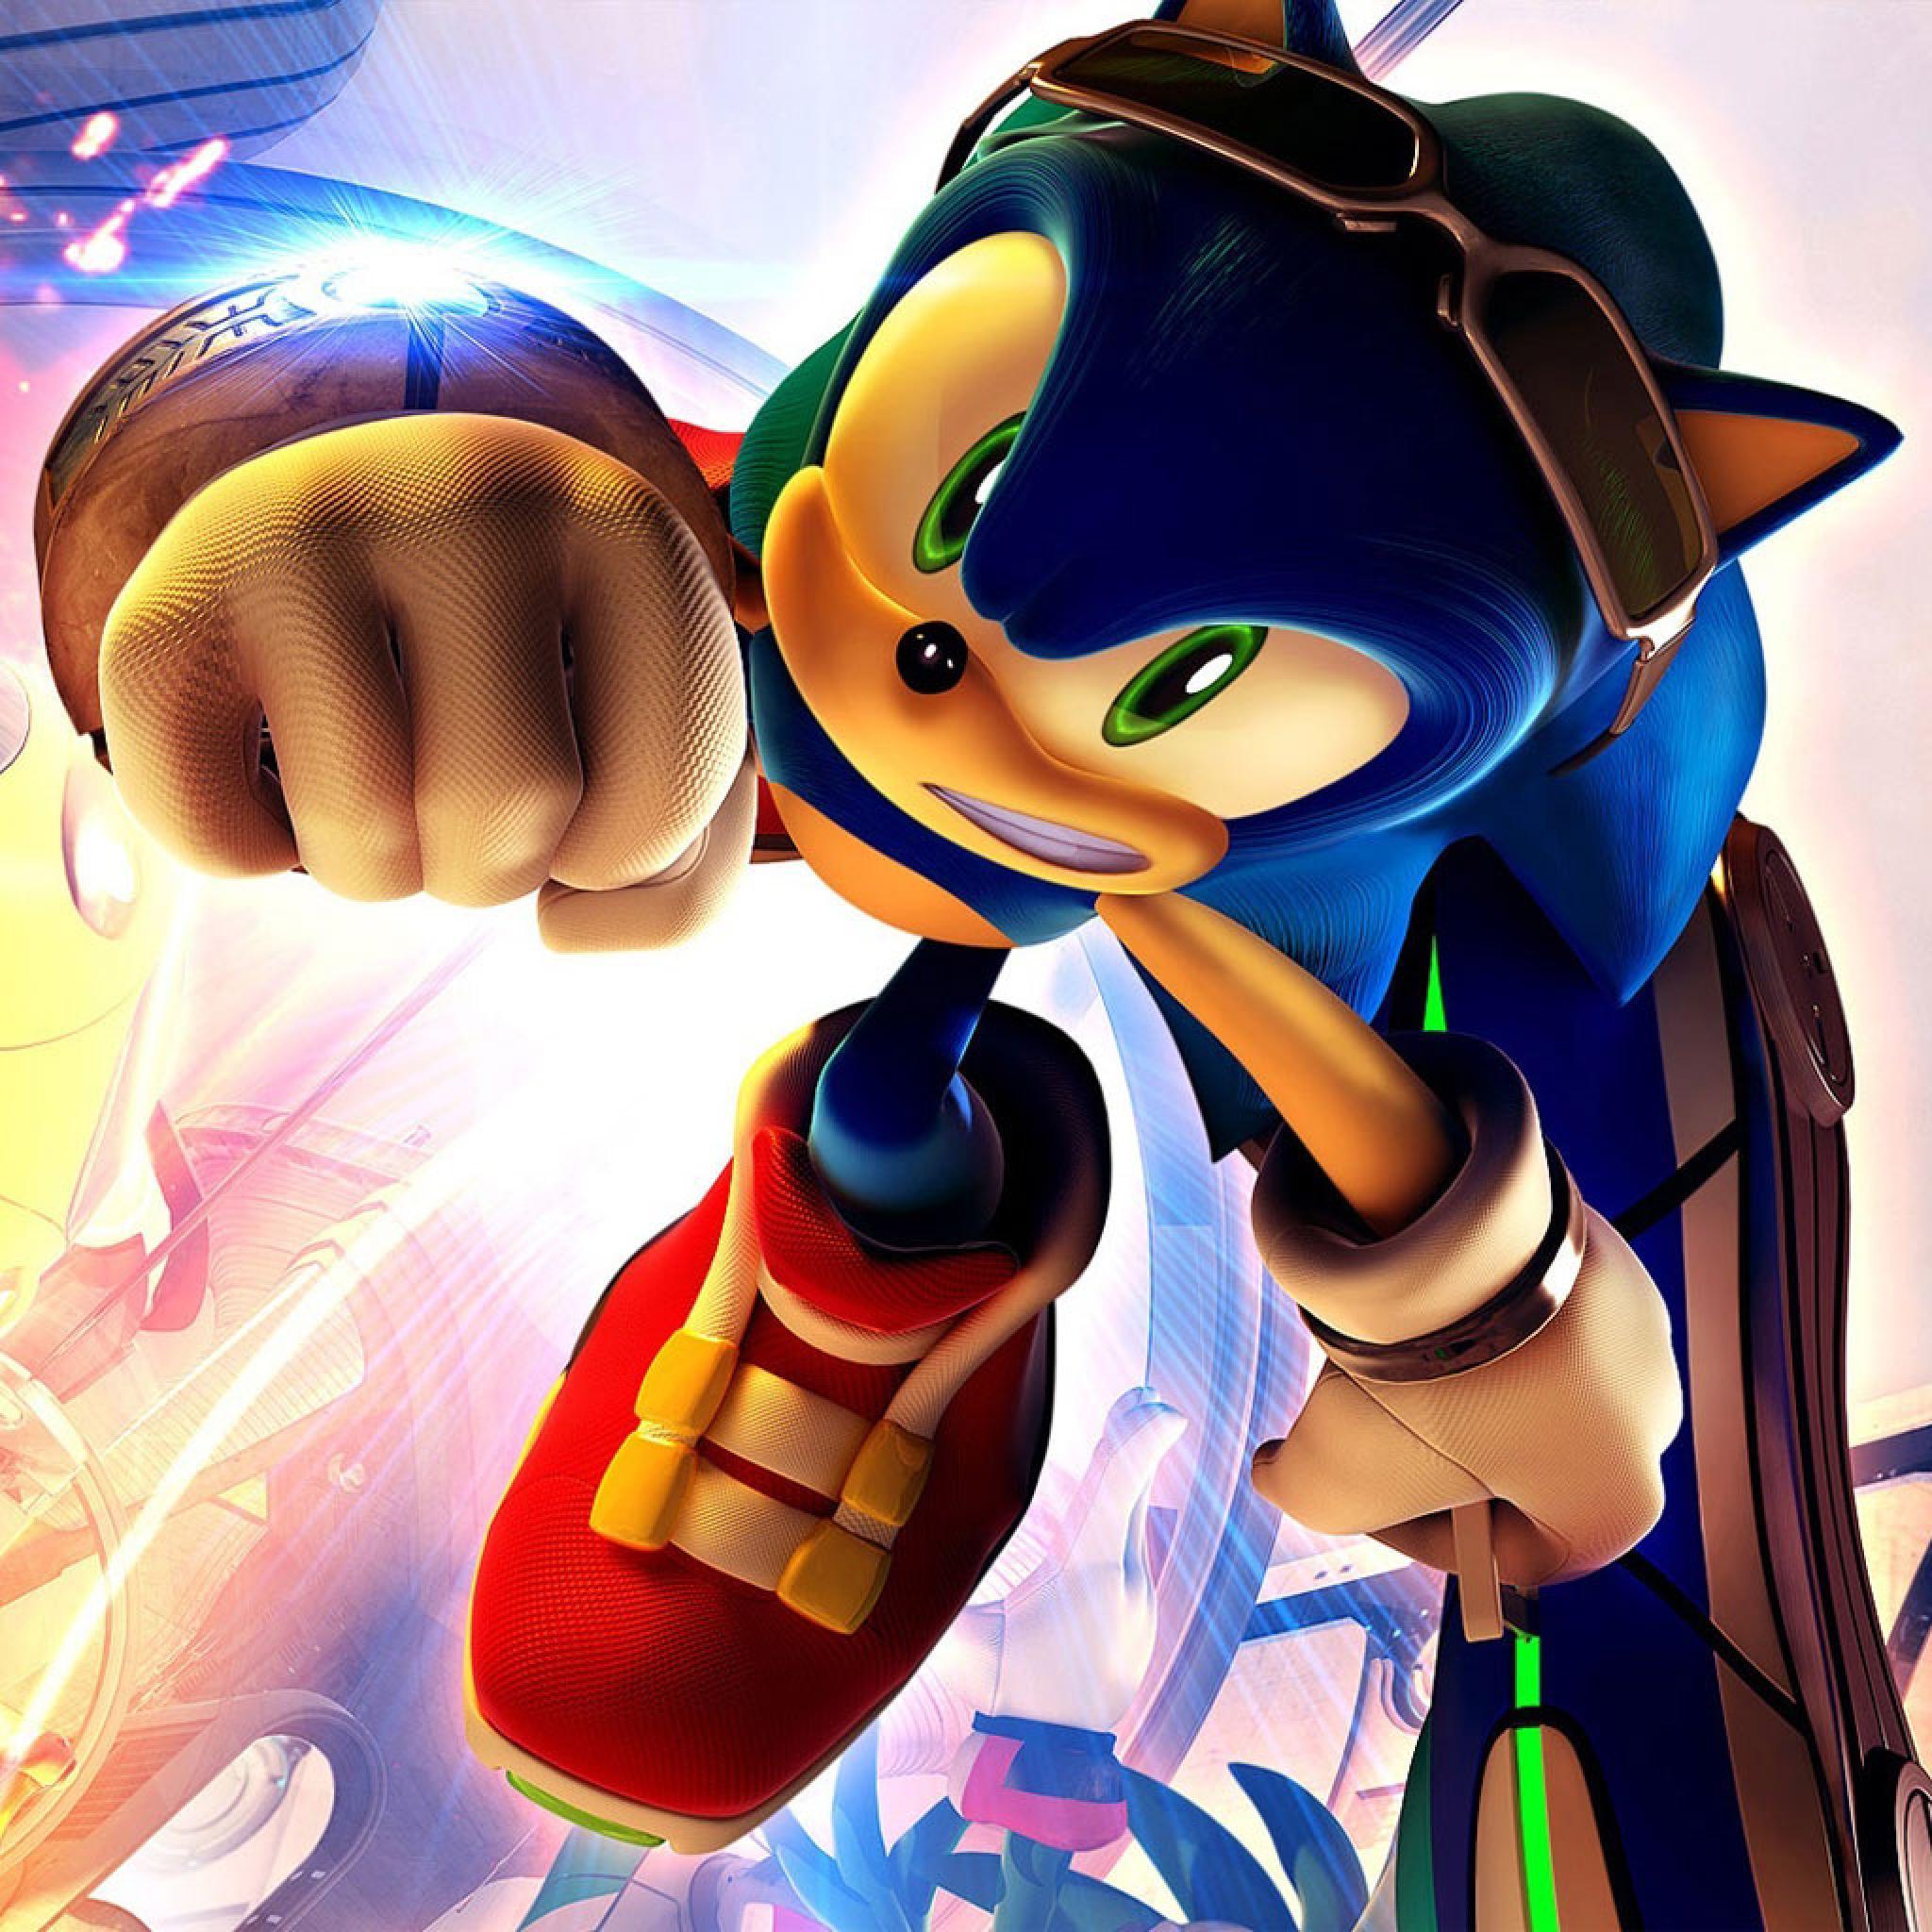 free download sonic free riders